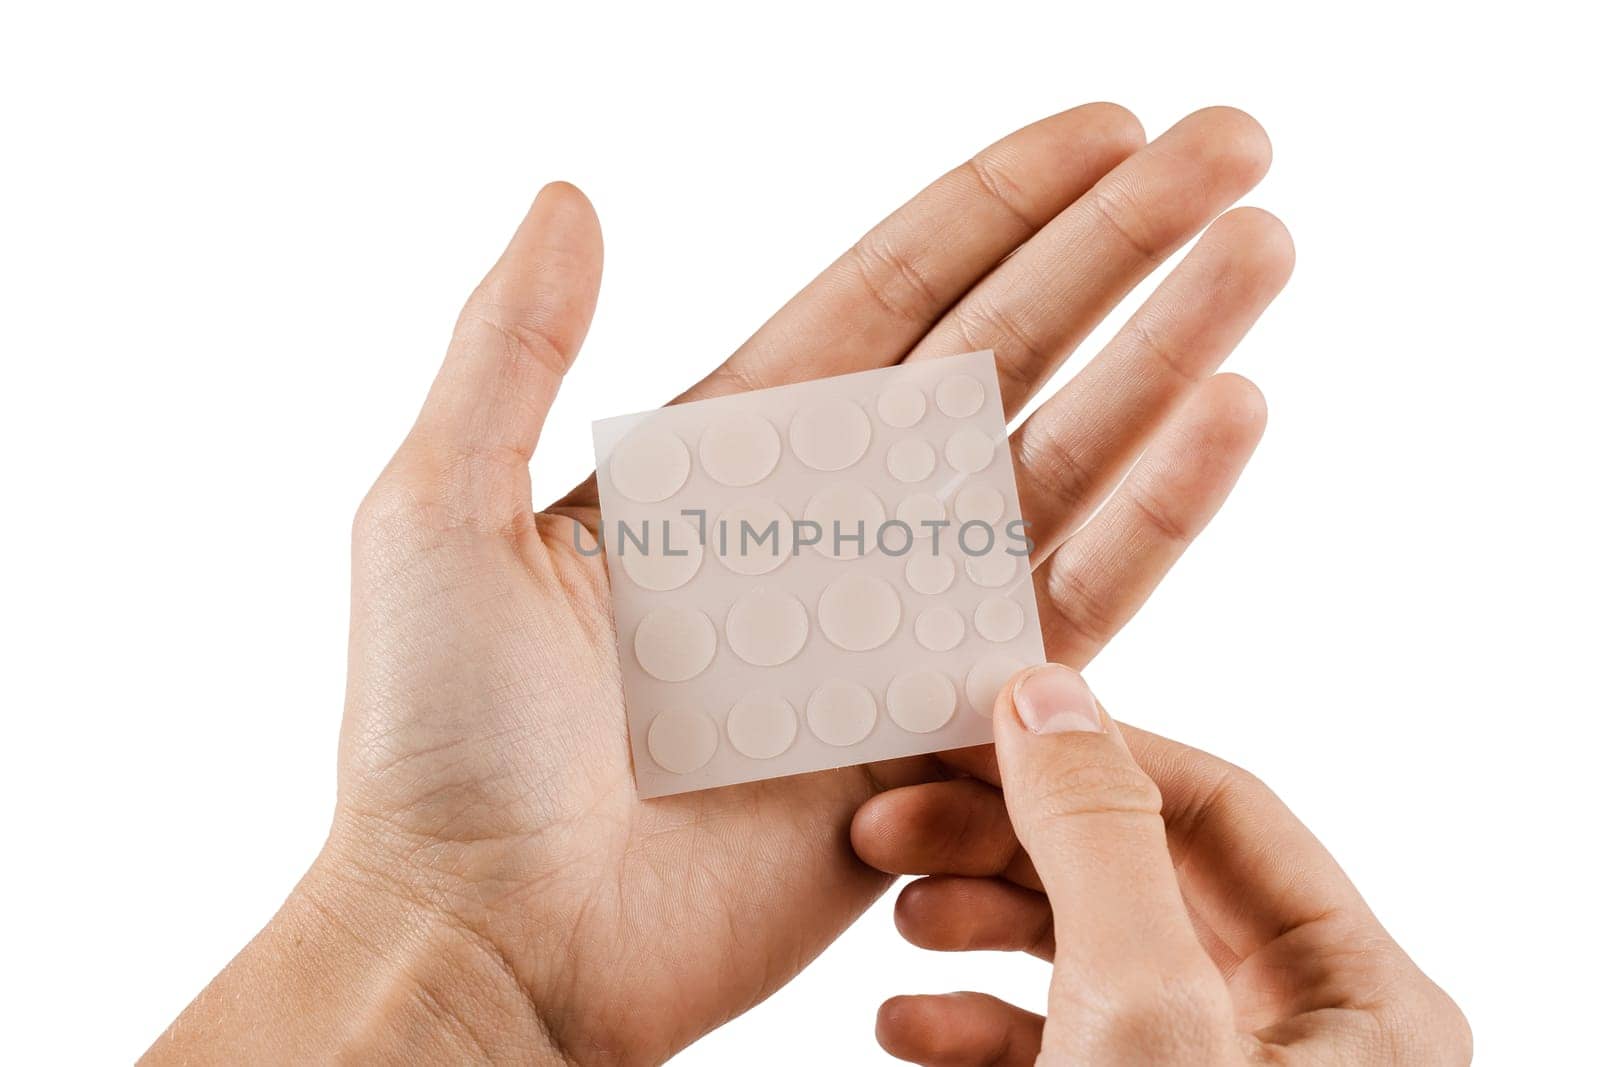 Set of round patches for acne in hands on white background. Acne patches for treatment of pimple and rosacea close-up. Facial rejuvenation cleansing cosmetology